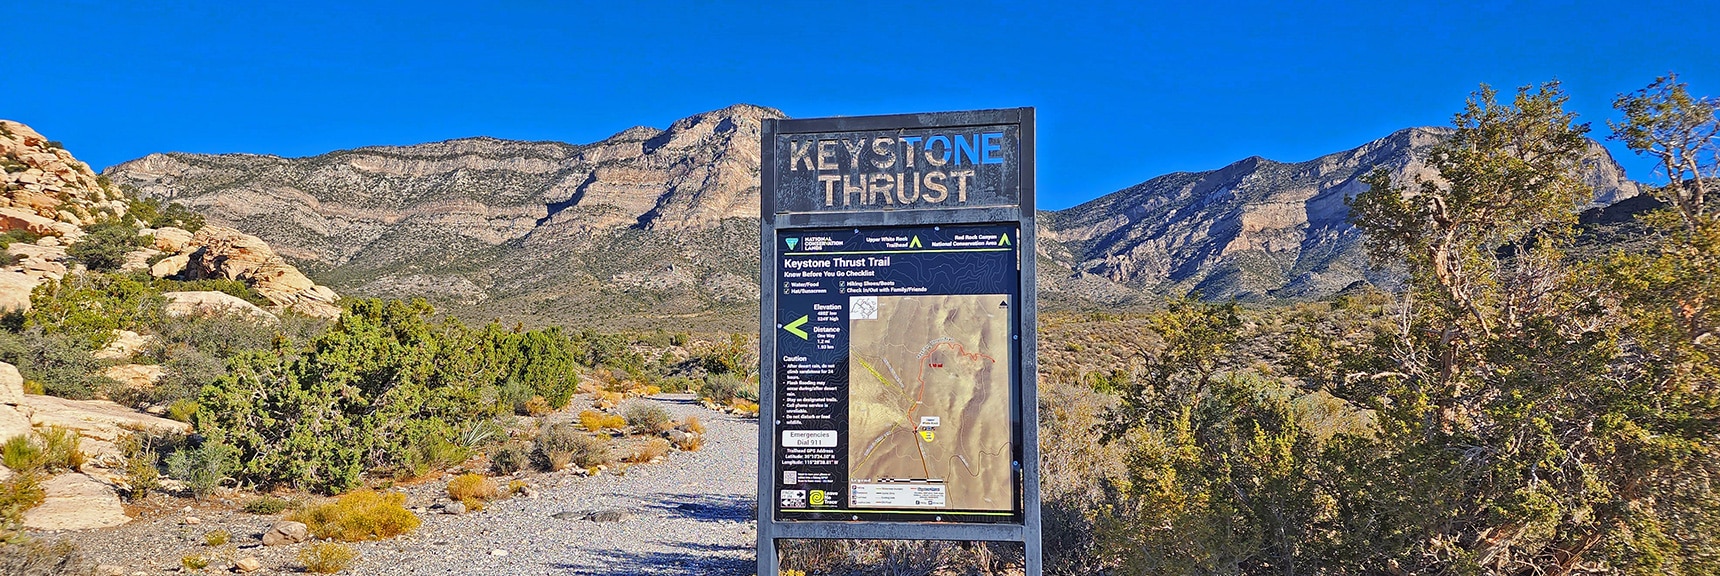 Head Toward the Keystone Thrust Trail. The Thrust is the Cliff Ahead | Kyle Canyon Grand Crossing | Southern Half | Red Rock Canyon National Conservation Area, Nevada